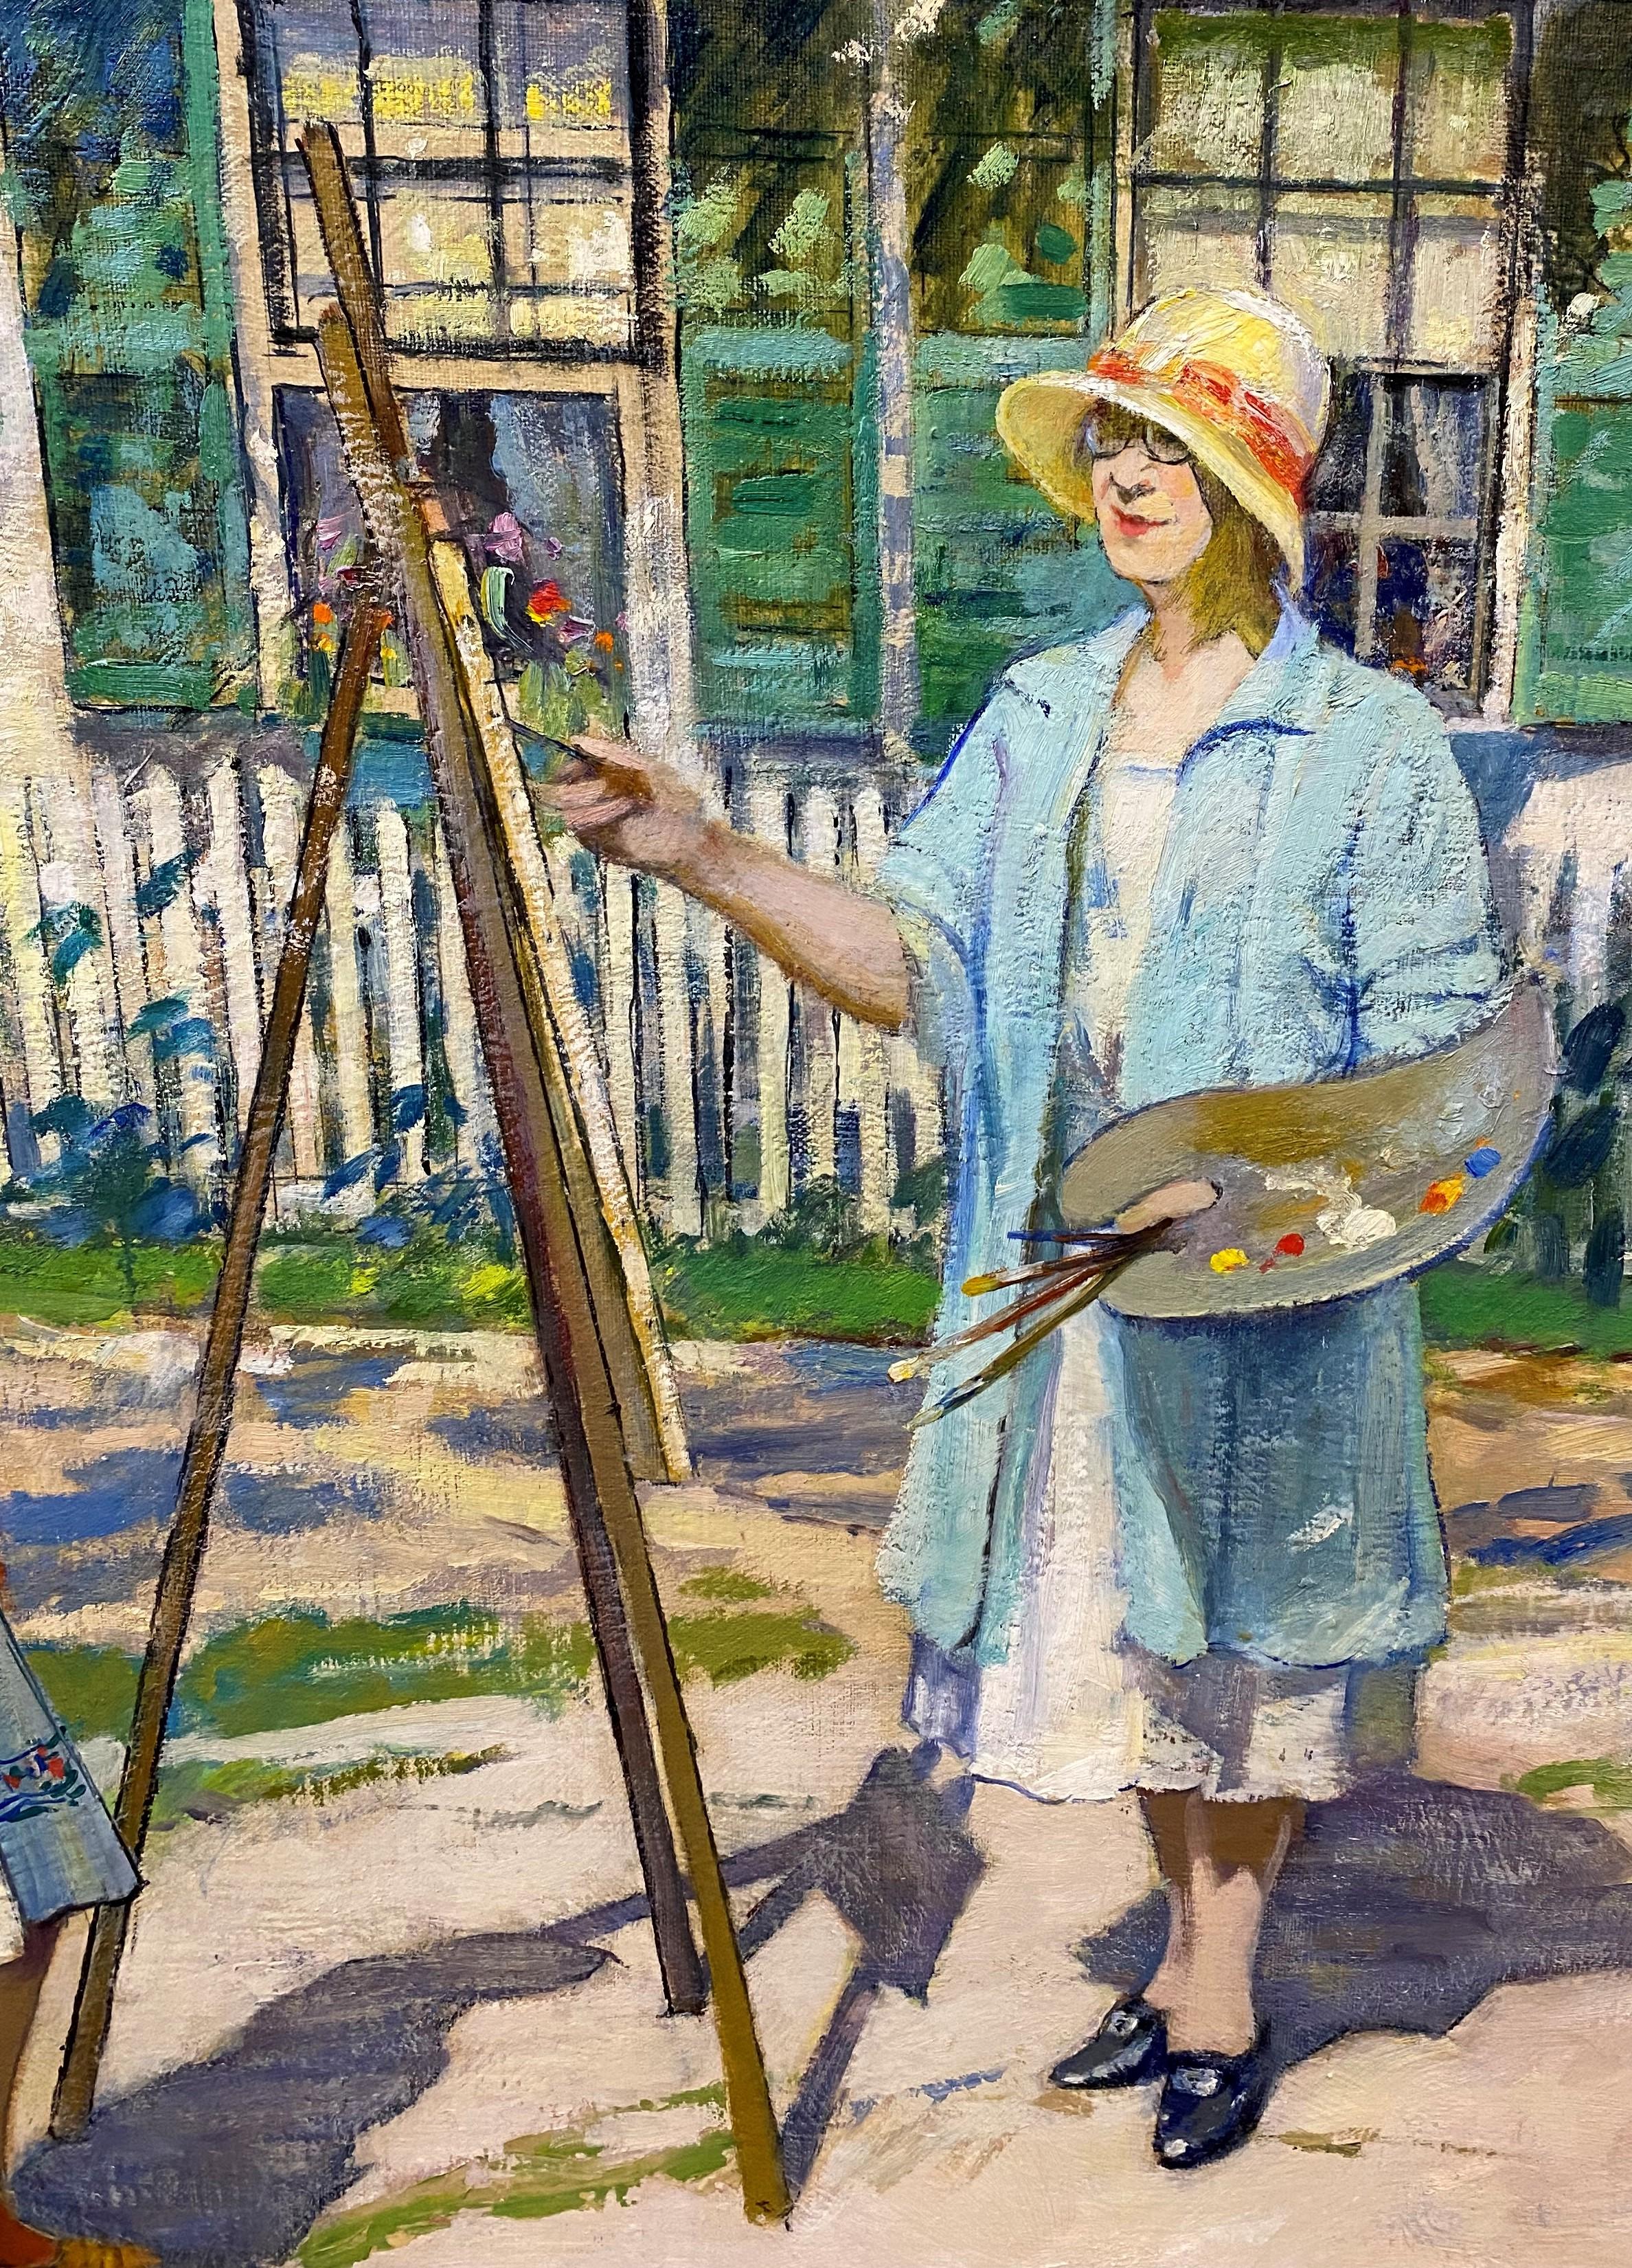 A wonderful large self portrait of the artist with a Russian model by American artist Pauline Lennards Palmer (1867-1938). Born in McHenry, Illinois, Palmer studied at the Art Institute of Chicago between 1893 and 1898, including a one-month session